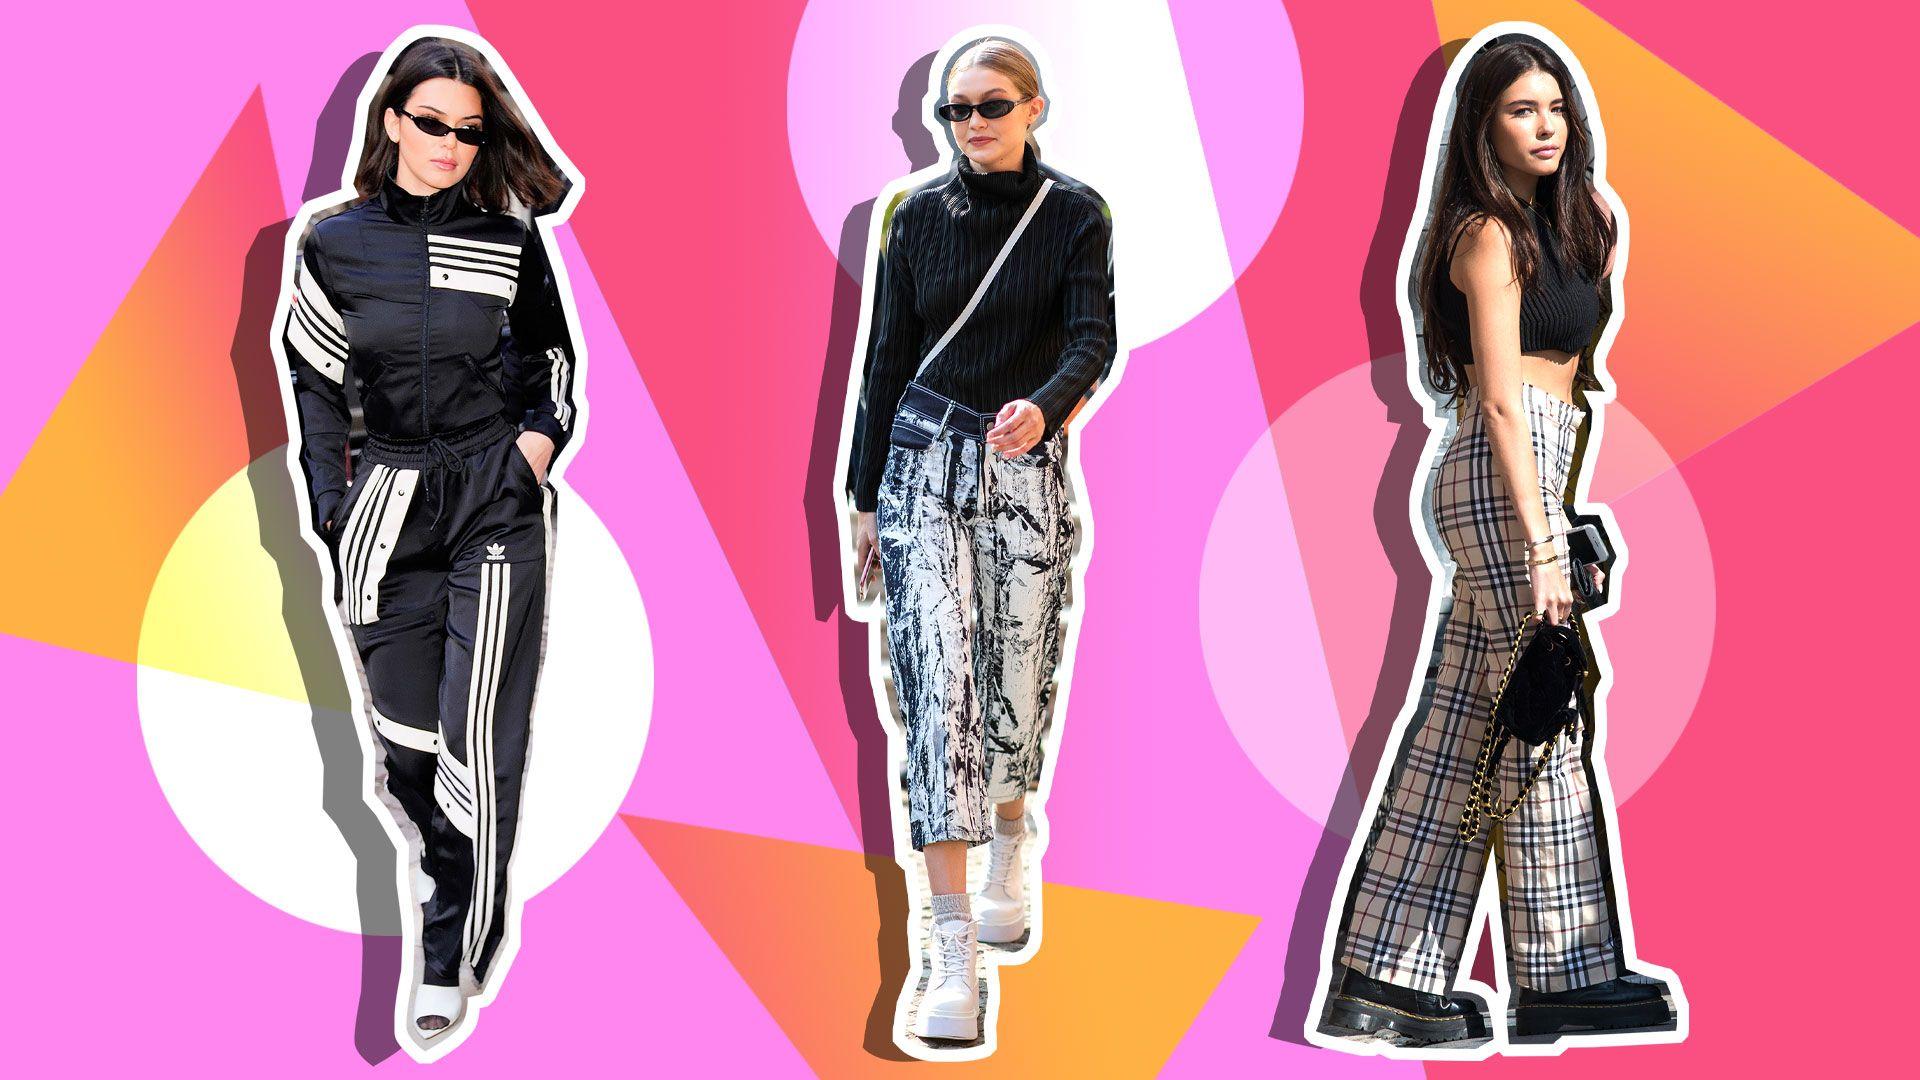 From 90 S Clothing and Apparel Logo - Celebs Who Wore '90s Fashion, Style Trends in 2018 | StyleCaster